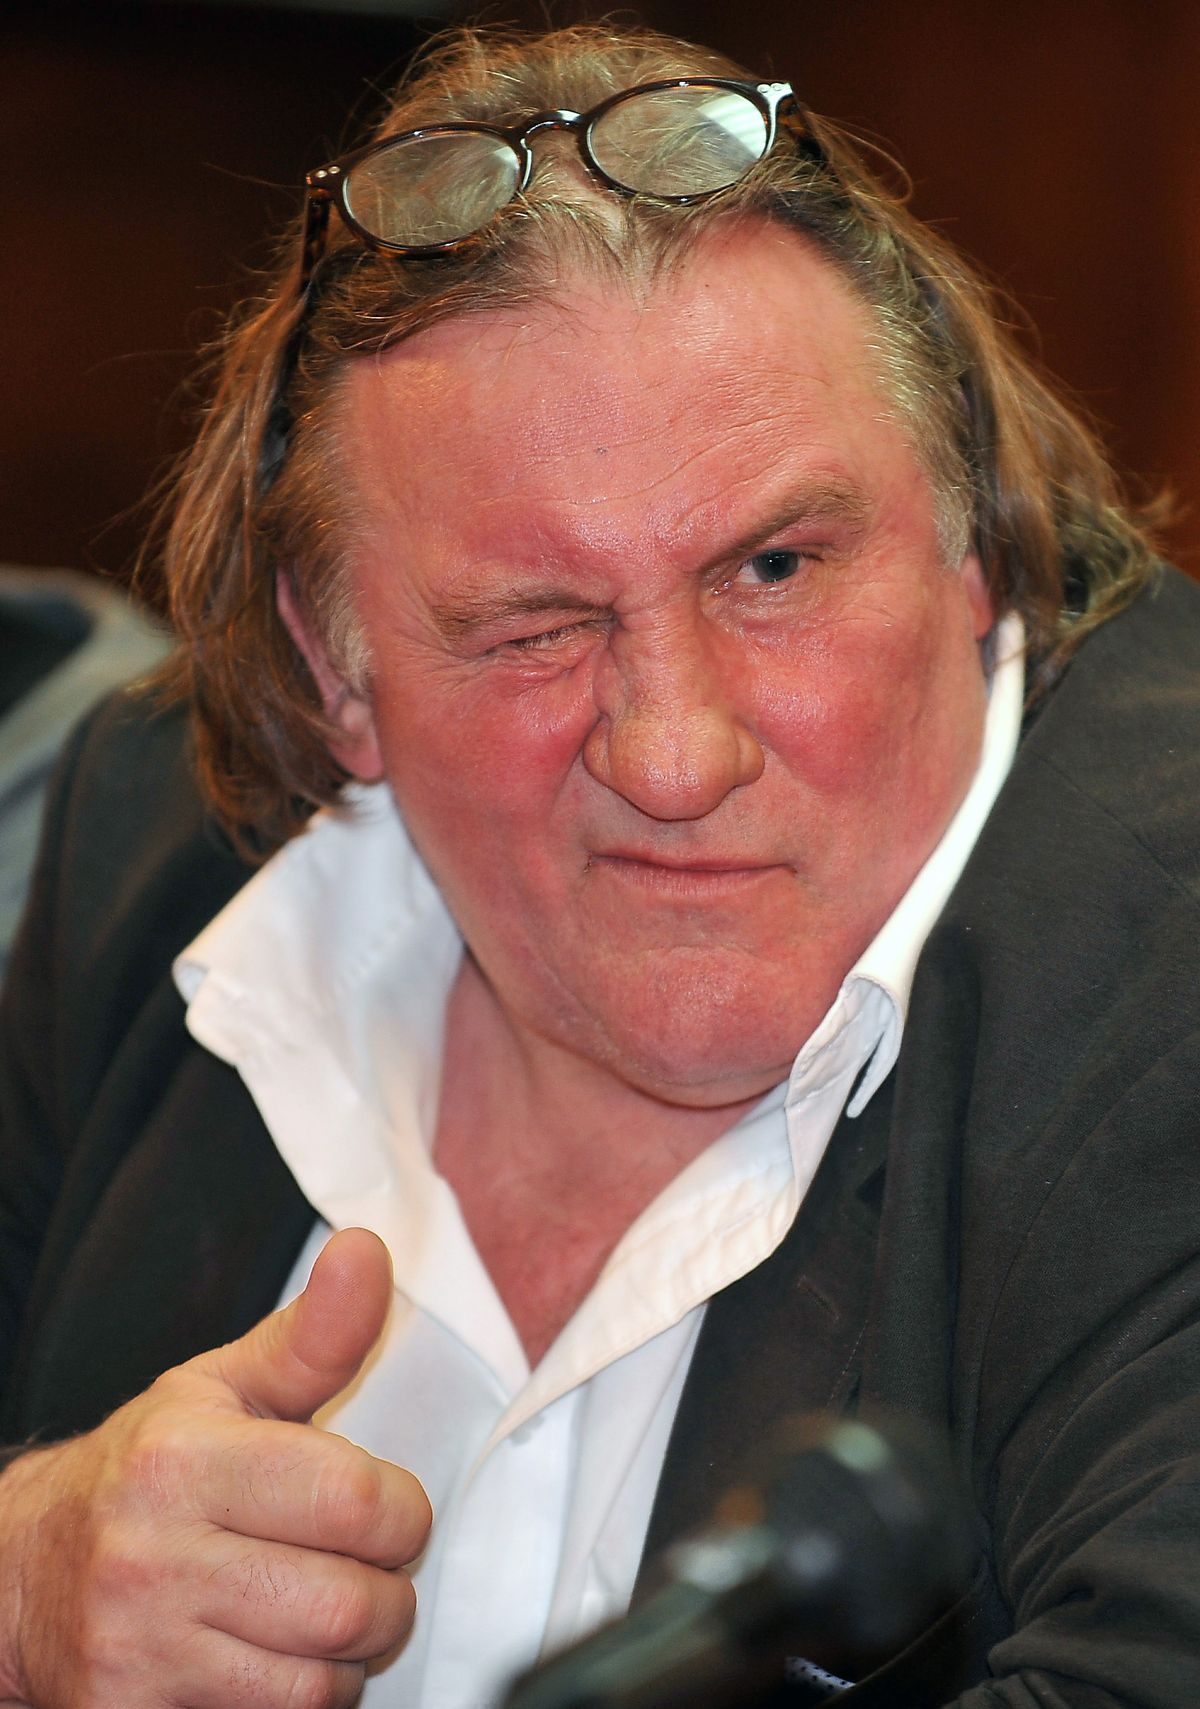 Gerard Depardieu met Tuesday with Montenegro’s prime minister. (Associated Press)